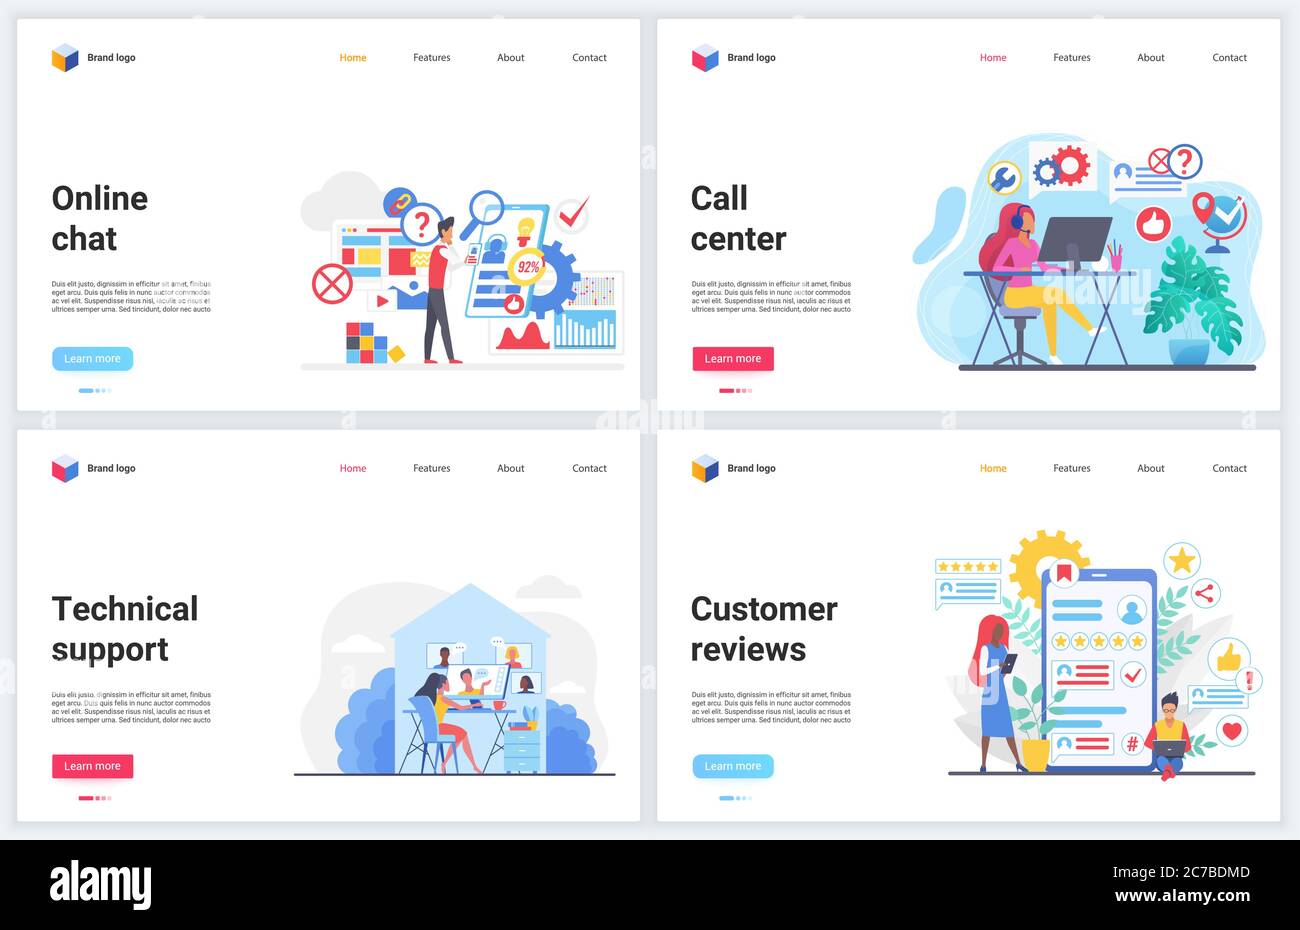 Customer support, help call center vector illustrations. Cartoon flat concept banners, interface website design with consultant hotline online chat, professional supporter answering helpdesk service Stock Vector